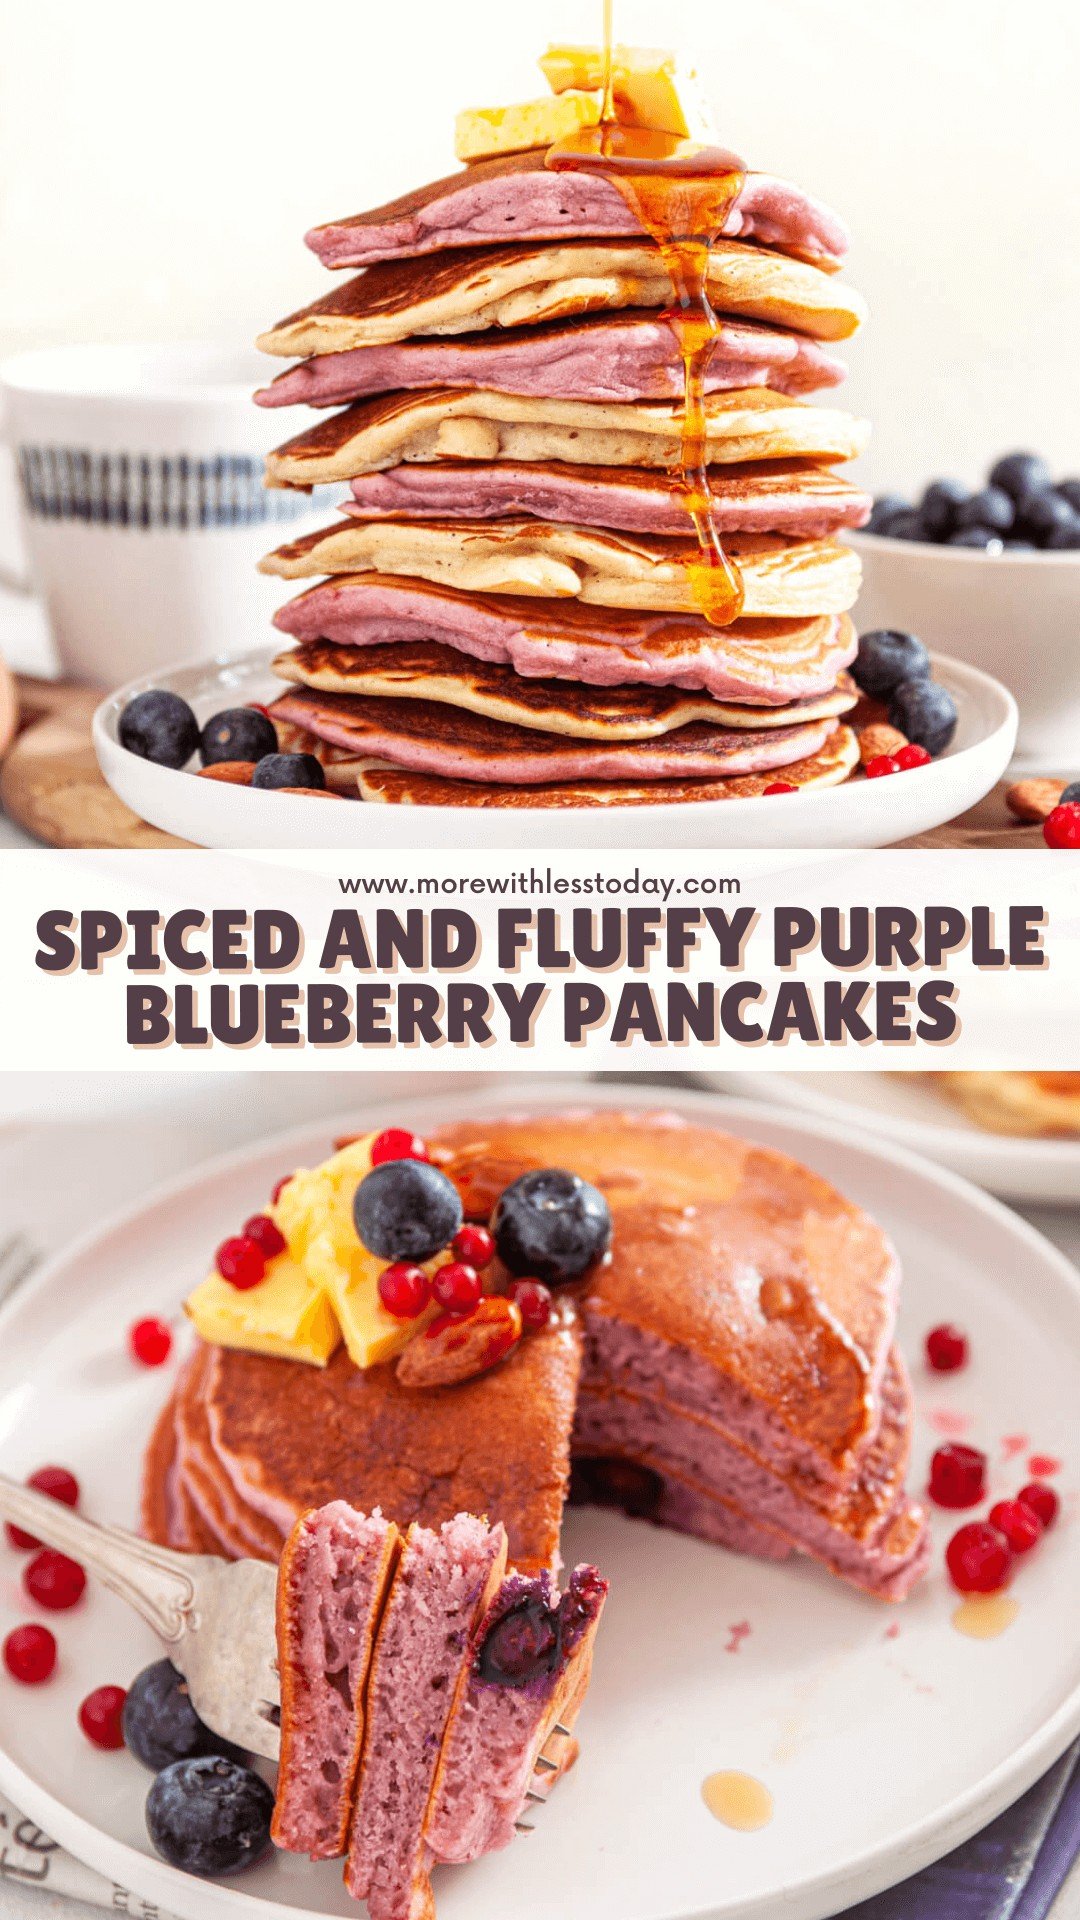 Spiced and Fluffy Purple Blueberry Pancakes -PIN